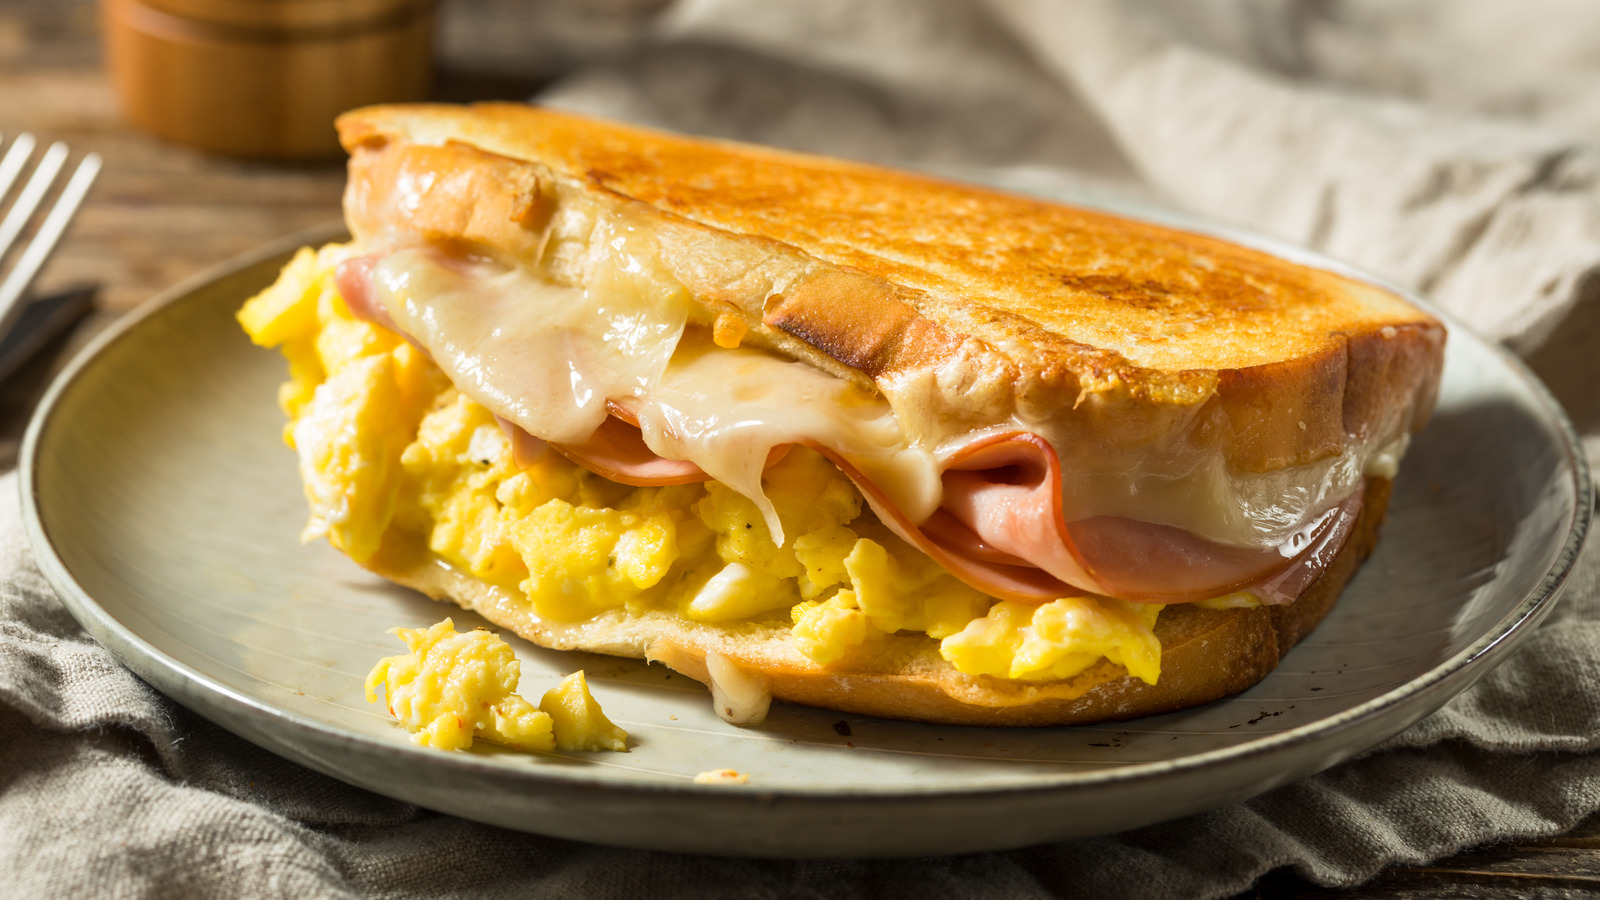 https://www.tastingtable.com/img/gallery/the-evolution-of-the-breakfast-sandwich-throughout-history/l-intro-1660071436.jpg